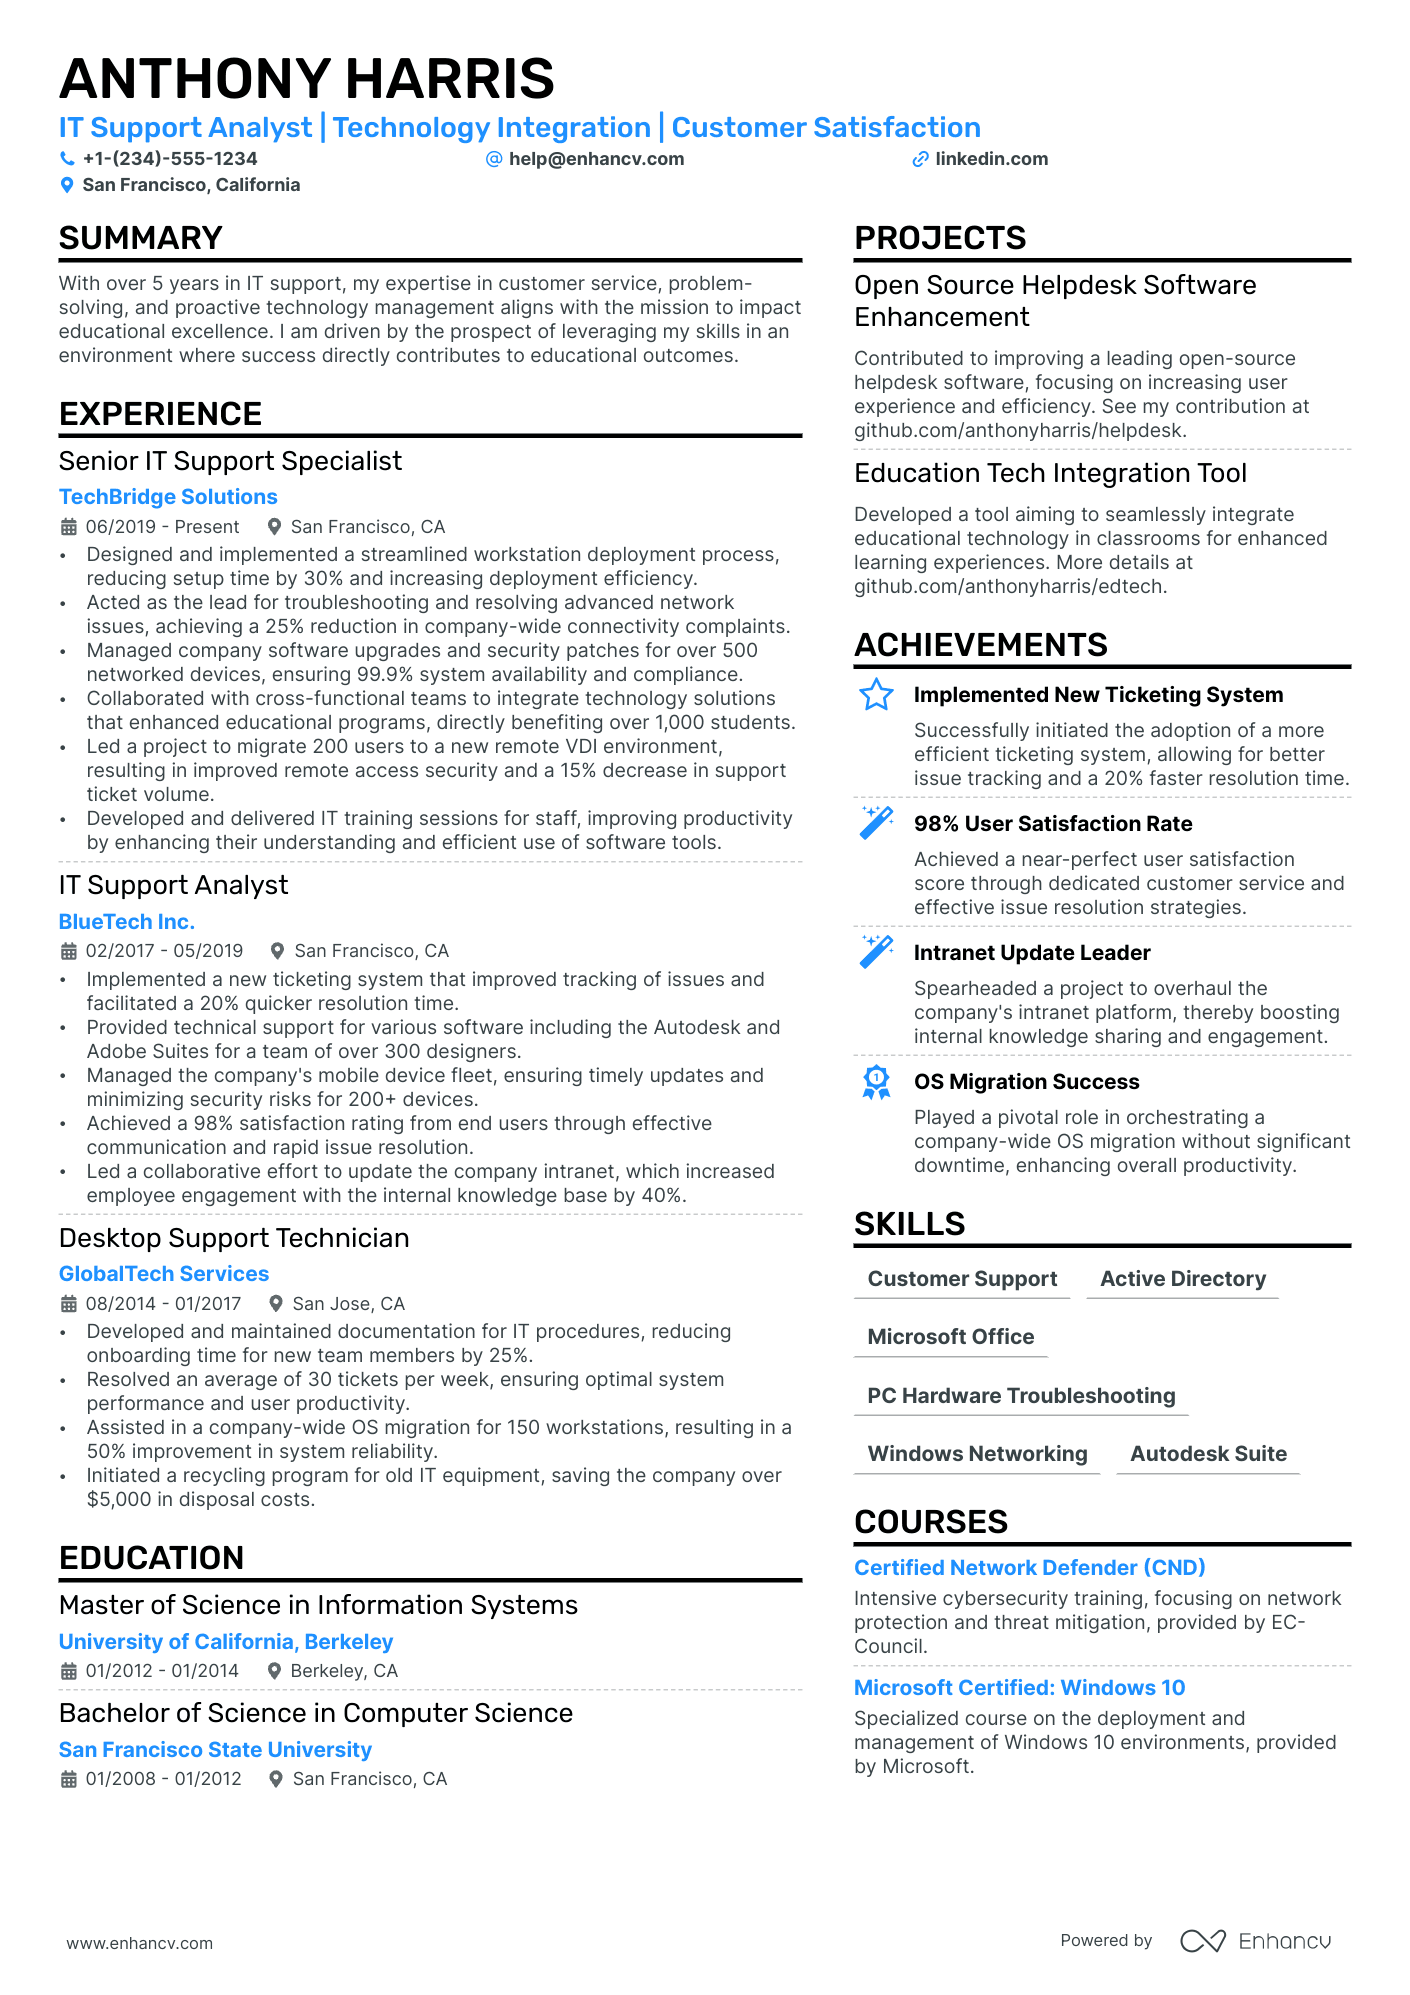 IT Support Analyst resume example